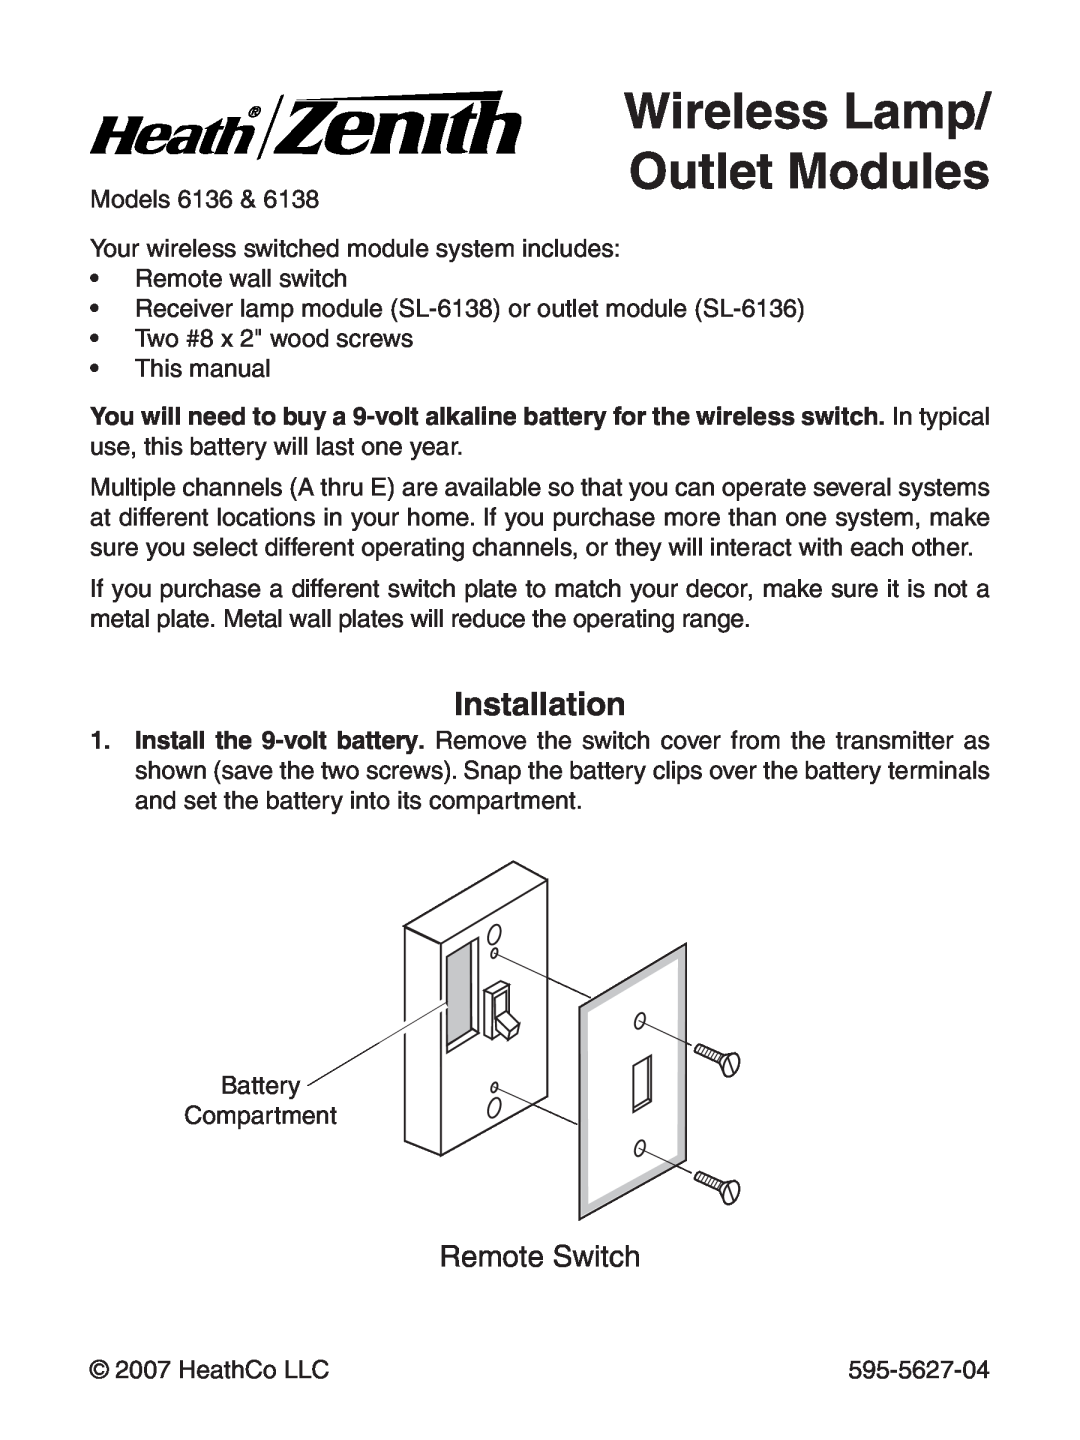 Heath Zenith 6138, 6136 manual Wireless Lamp/ Outlet Modules, Installation, Remote Switch 